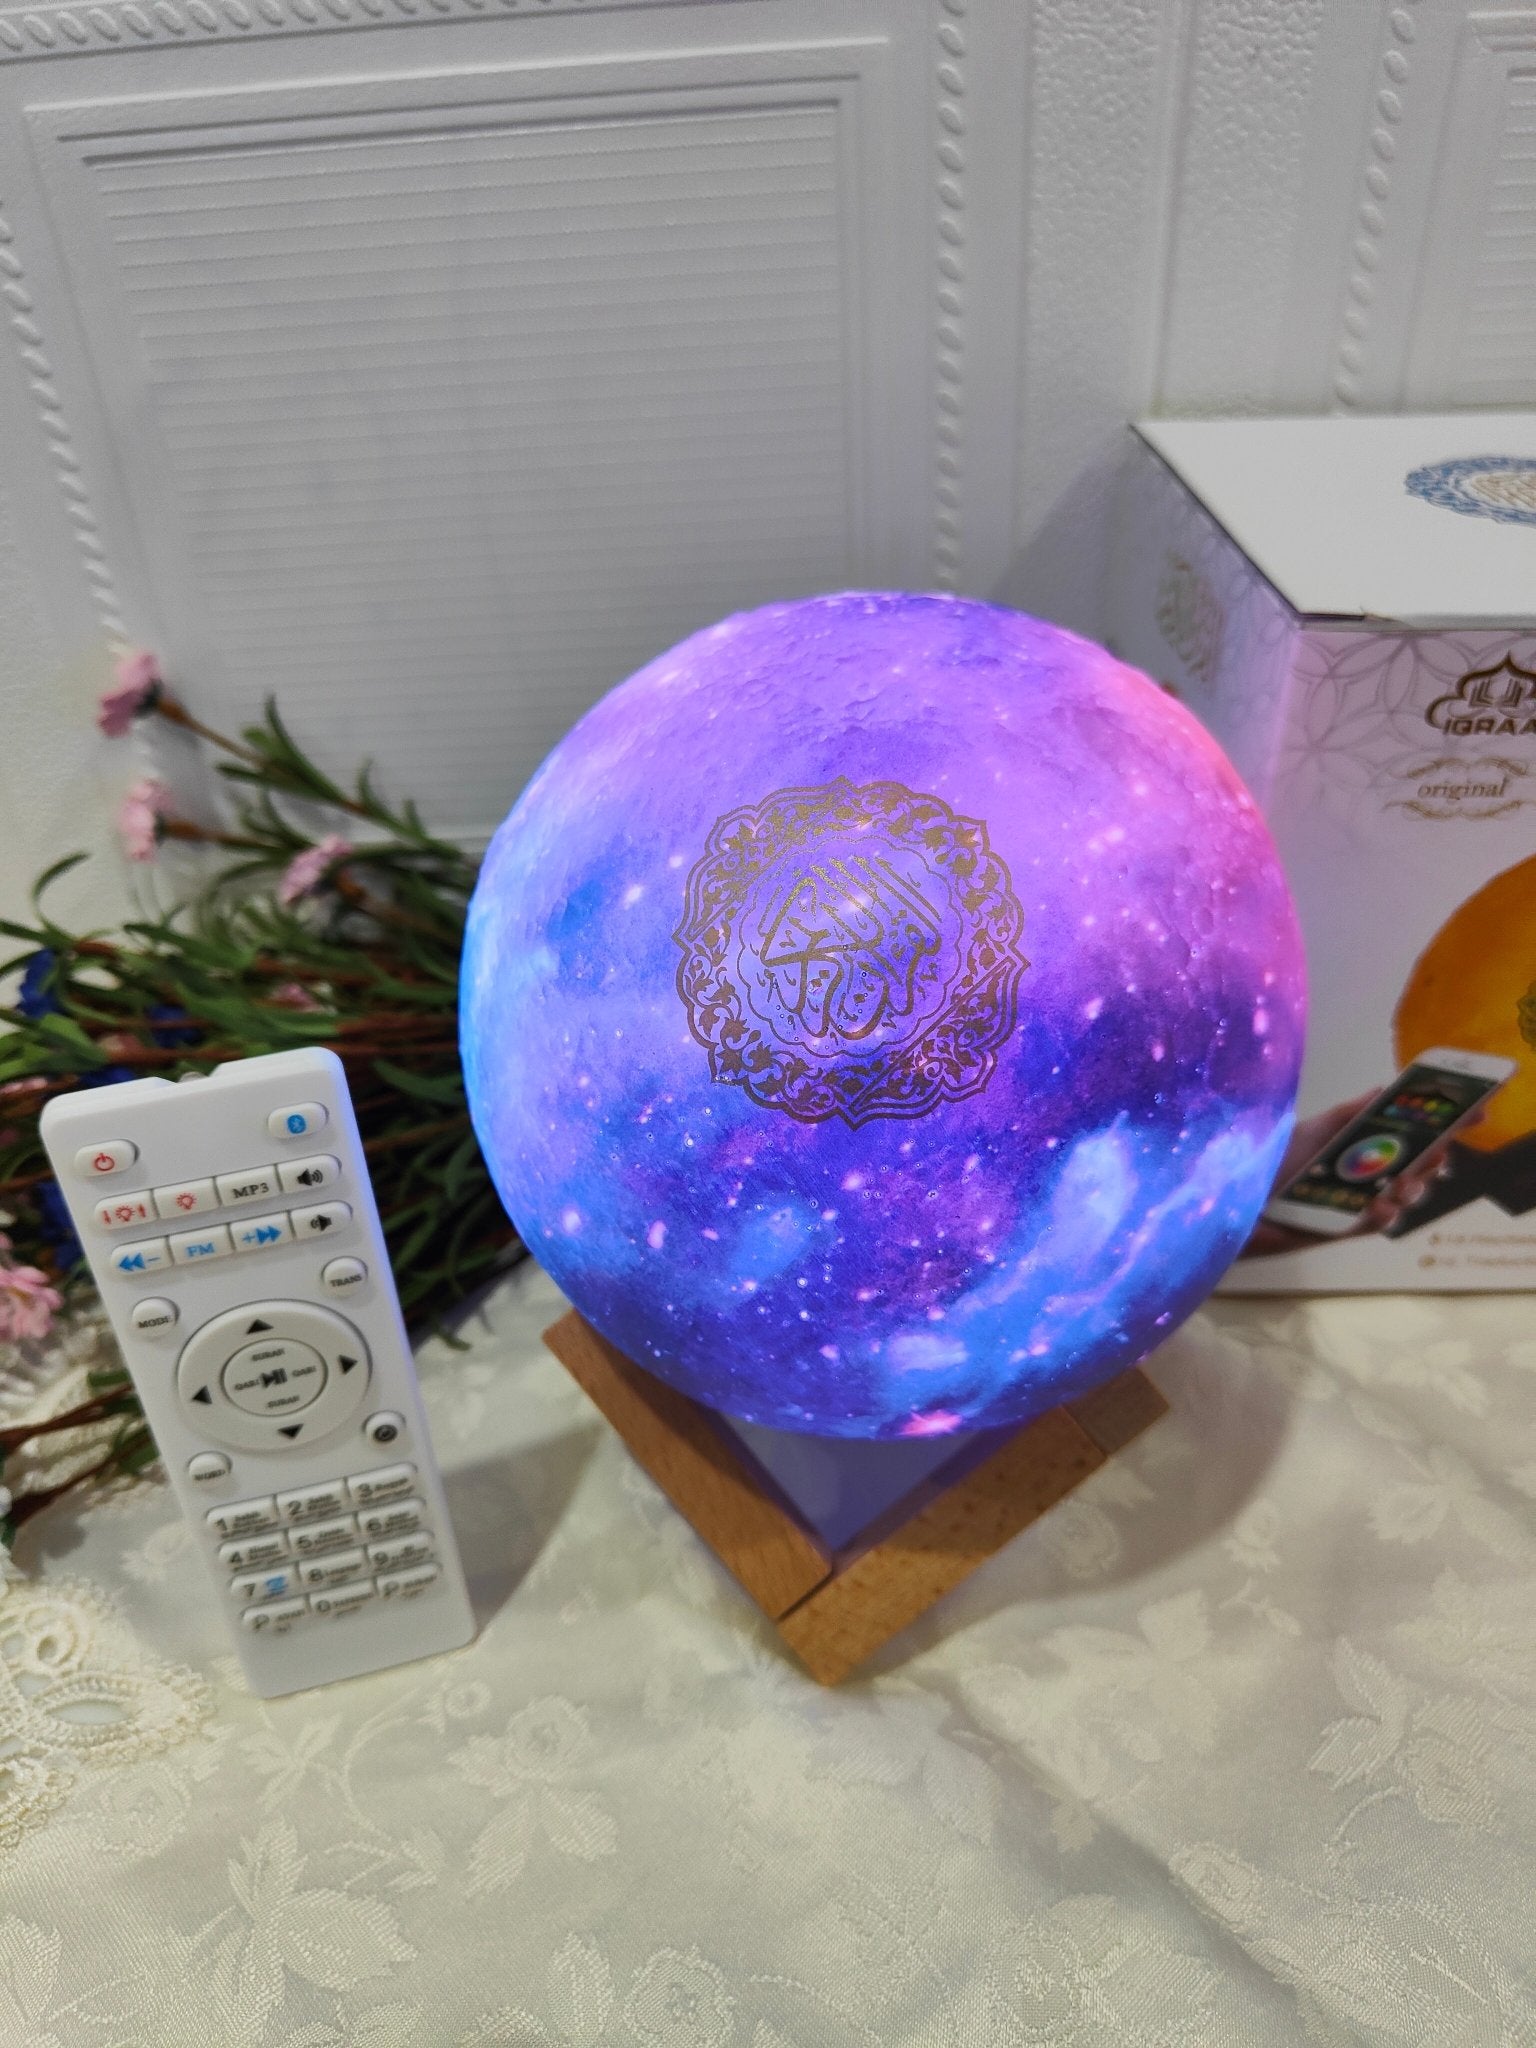 Wireless Quran Bluetooth Moonlamp Speaker, Galaxy SQ-530, with App Control & Remote Control. Beautiful reciters from around the world with translations in many languages including but not limited to English, Urdu, Bangla, French, Persian, Spanish, German and many more!

Sahih Bukhari and Sahih Muslim Ahadith collection. Just plug and play.
